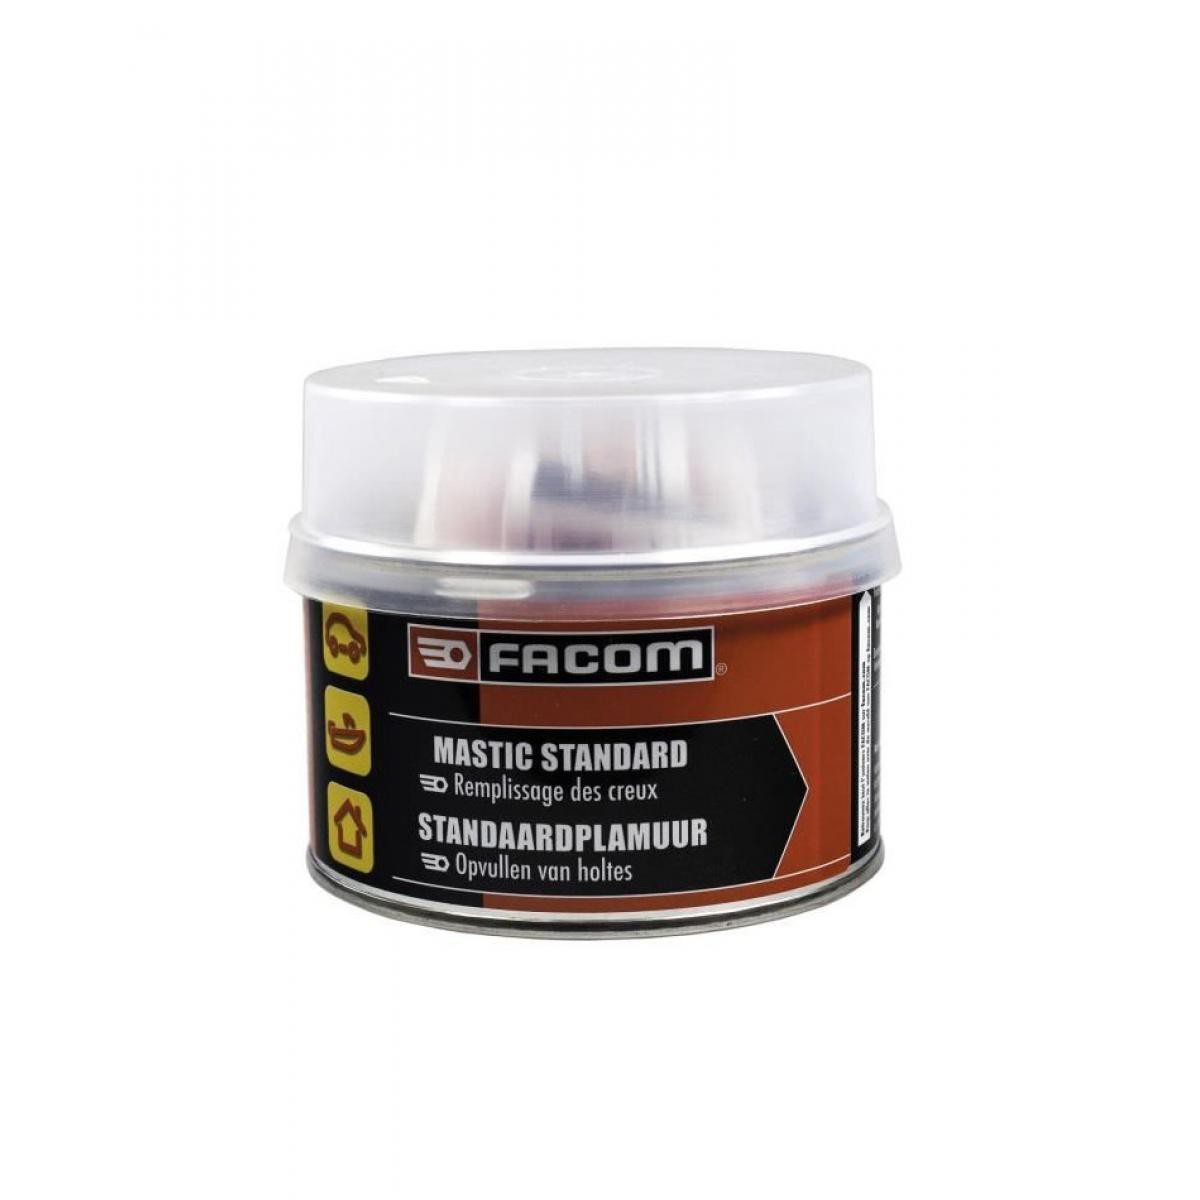 Facom - FACOM Mastic polyester standard - Remplissage nivellement - 500 g - Mastic, silicone, joint